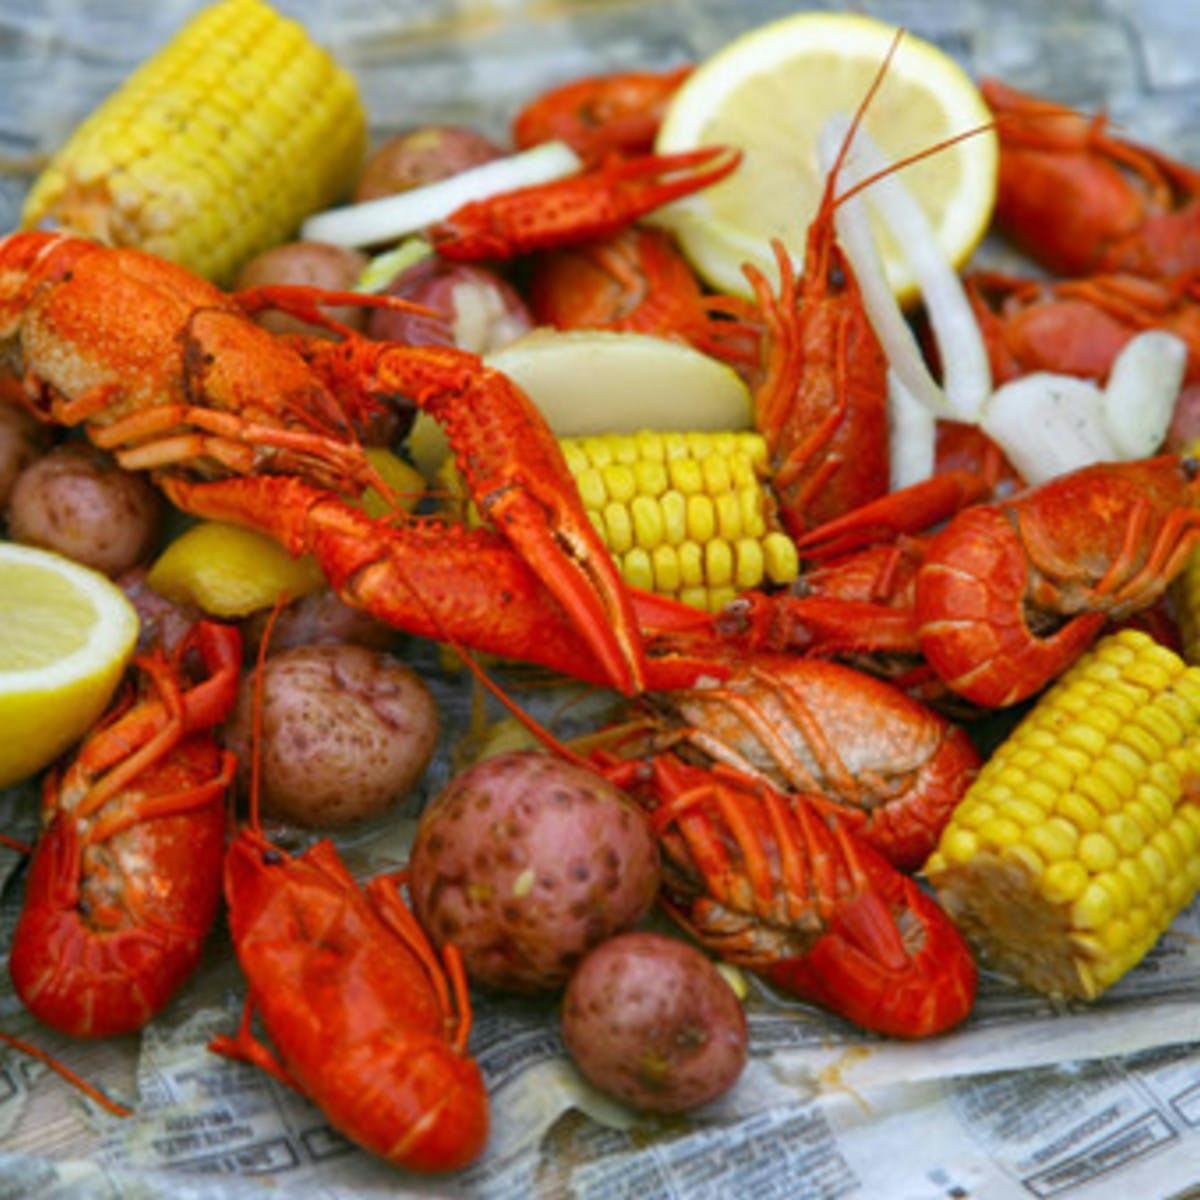 48 Pack Lets Get Cray Seafood Boil Plates for Crawfish Boil Party